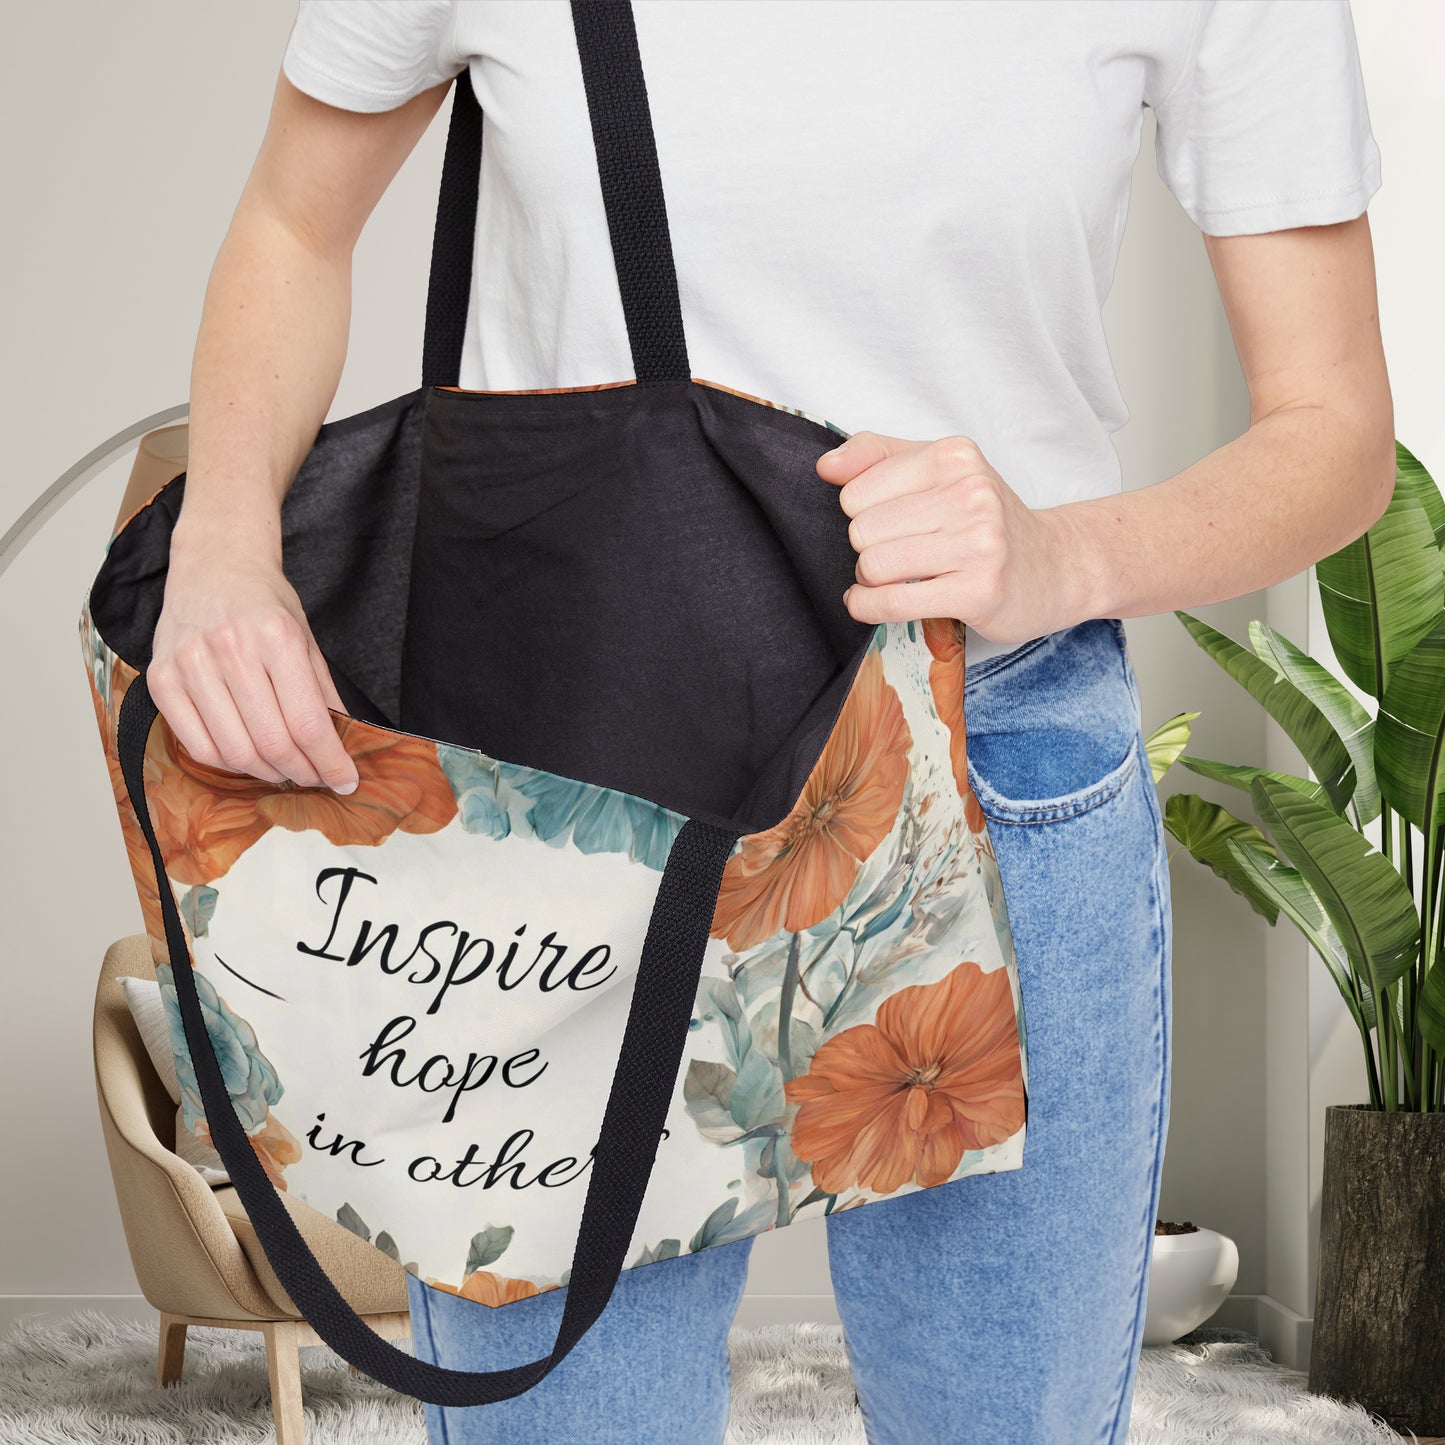 Another version of the flowery “Inspire hope in others” Weekender Tote Bag. You have it in you, we have the potential in all of us.